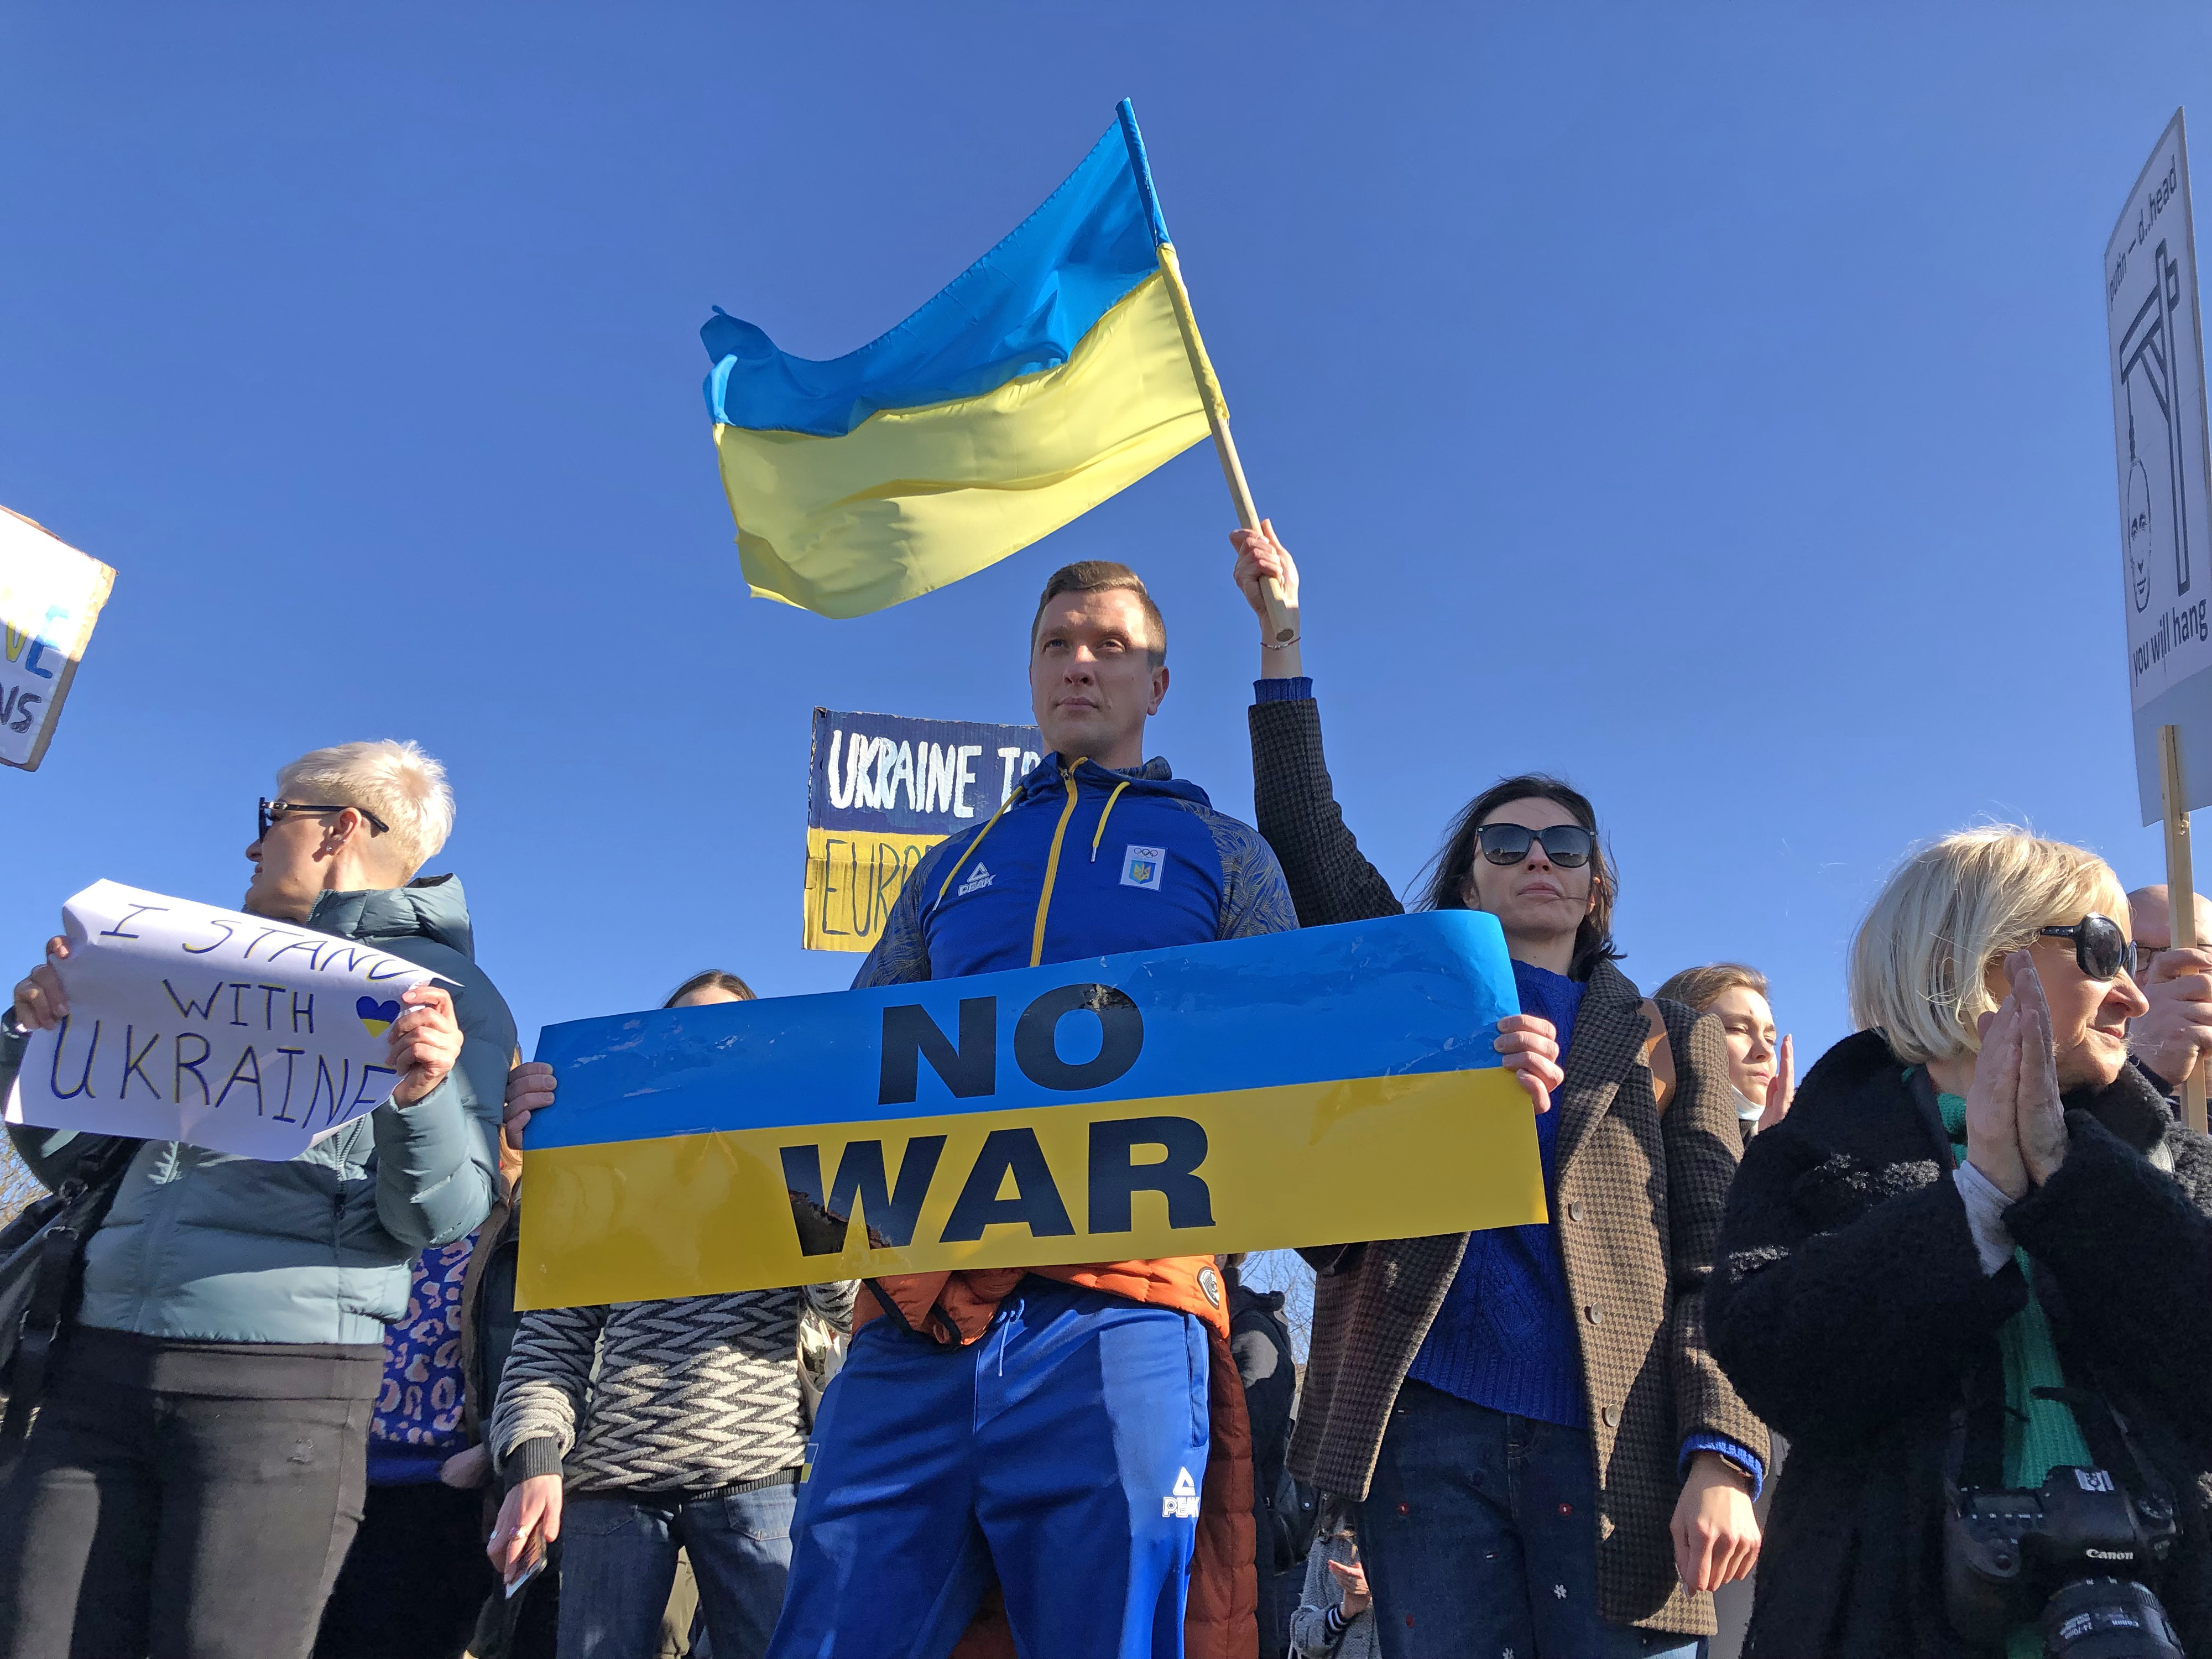 Protests against the Russian invasion of Ukraine.